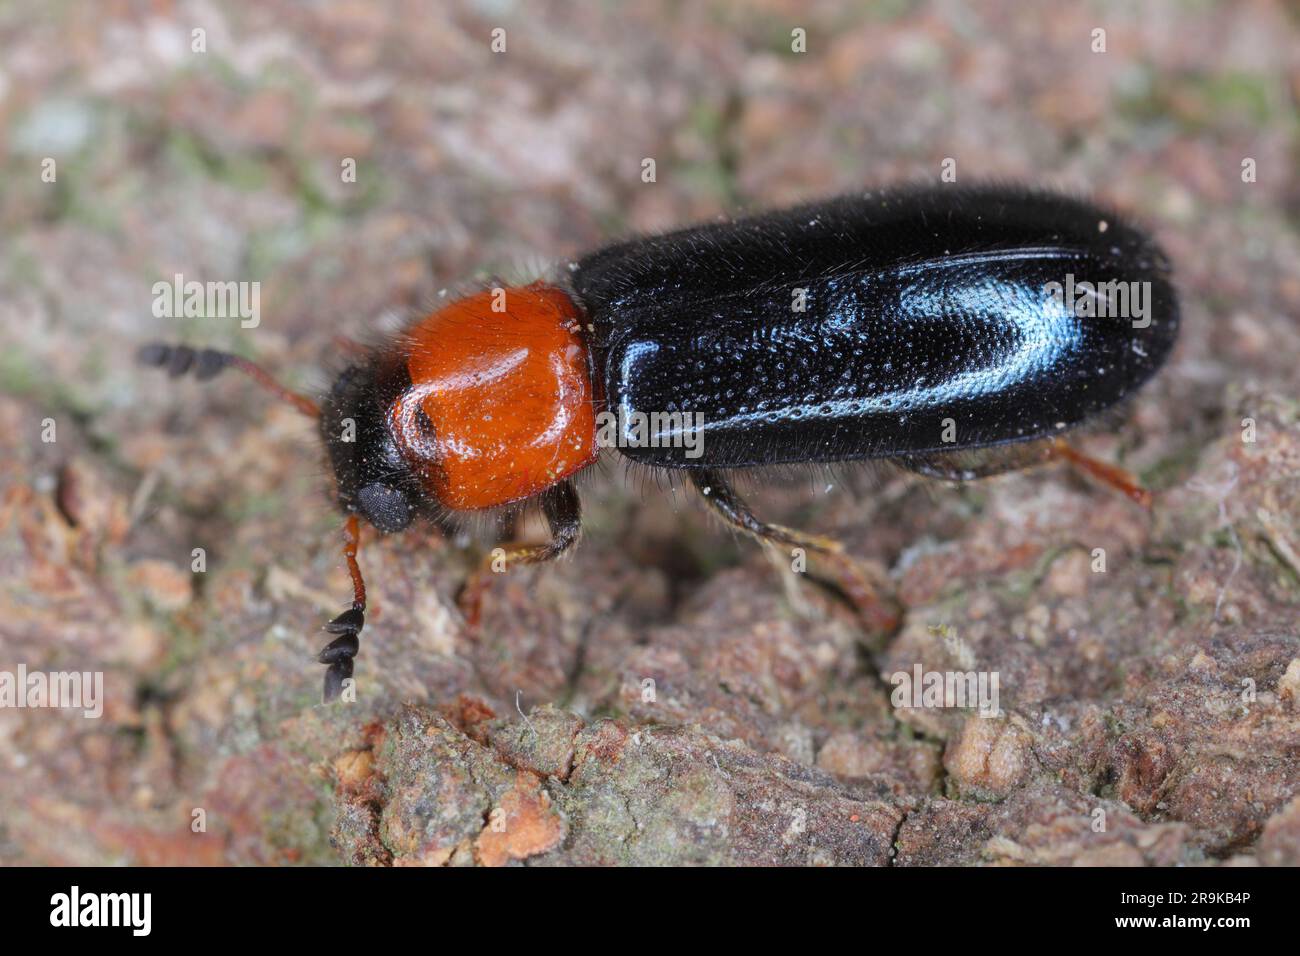 Dermestoides sanguinicollis. A very rare species of beetle in the family Cleridae. Predator found in natural forests. Stock Photo